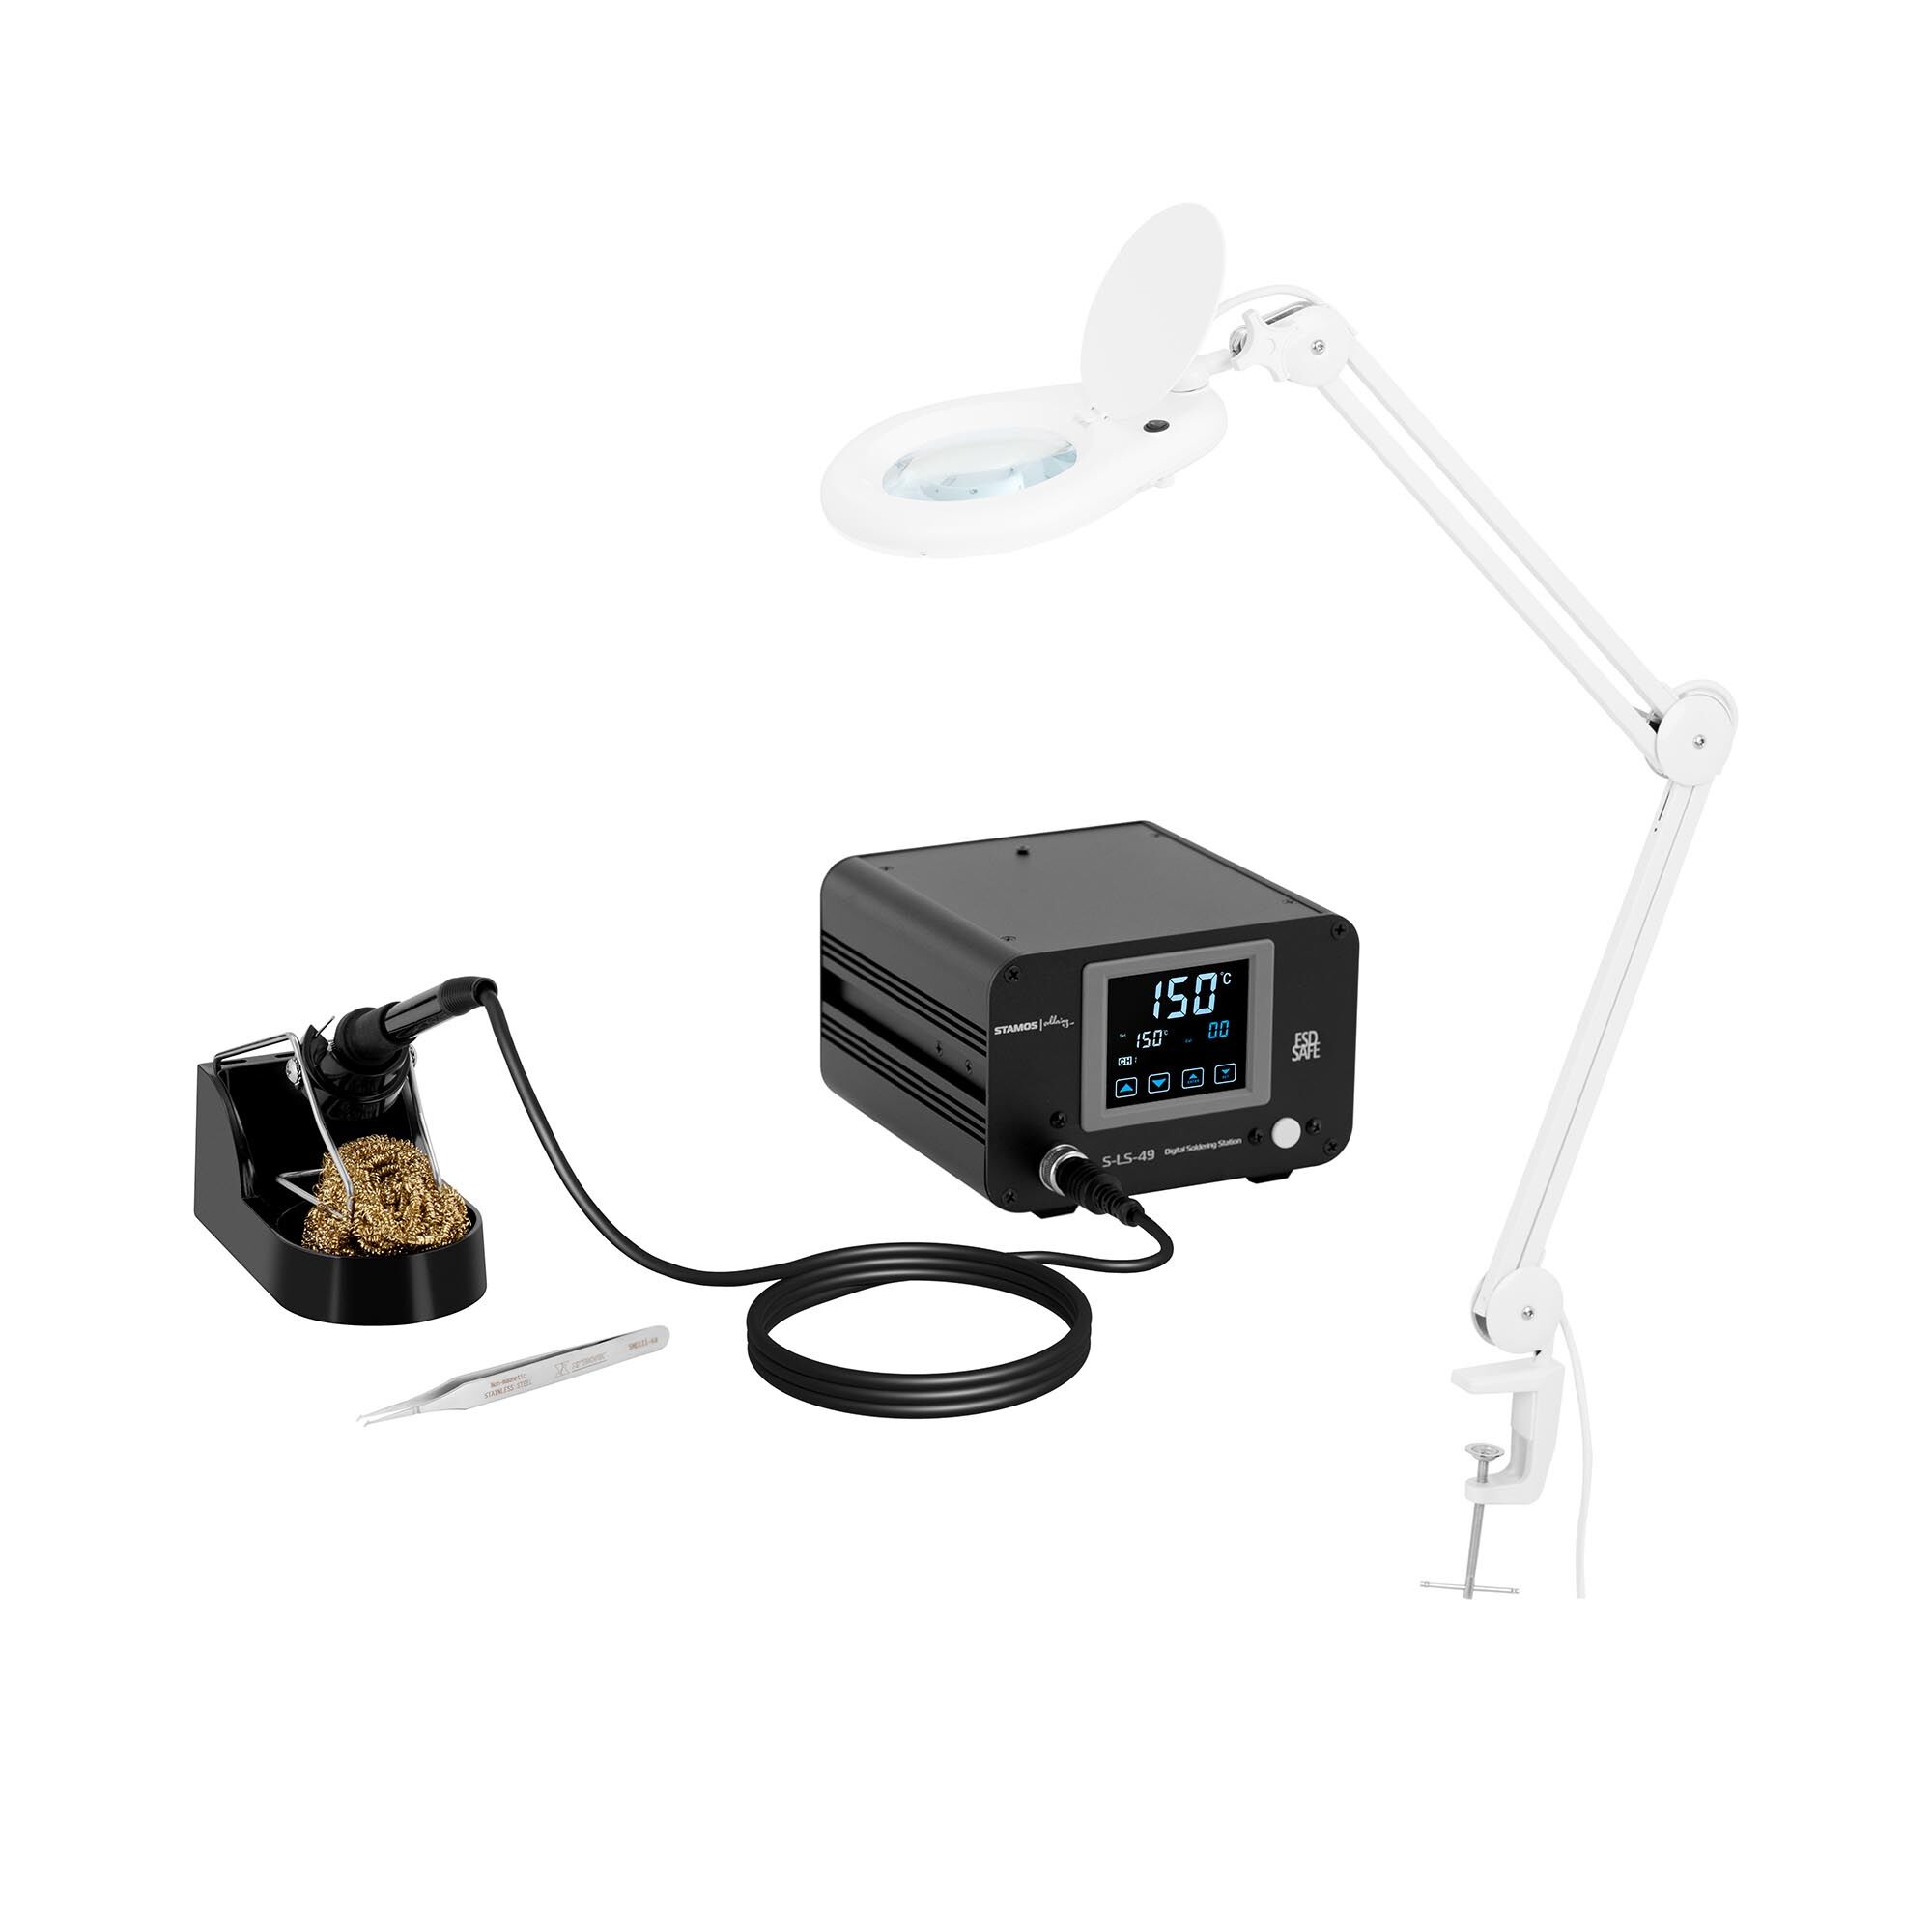 Stamos Soldering Soldering Station Set with Magnifying Lamp - digital - 100 W - LCD touch